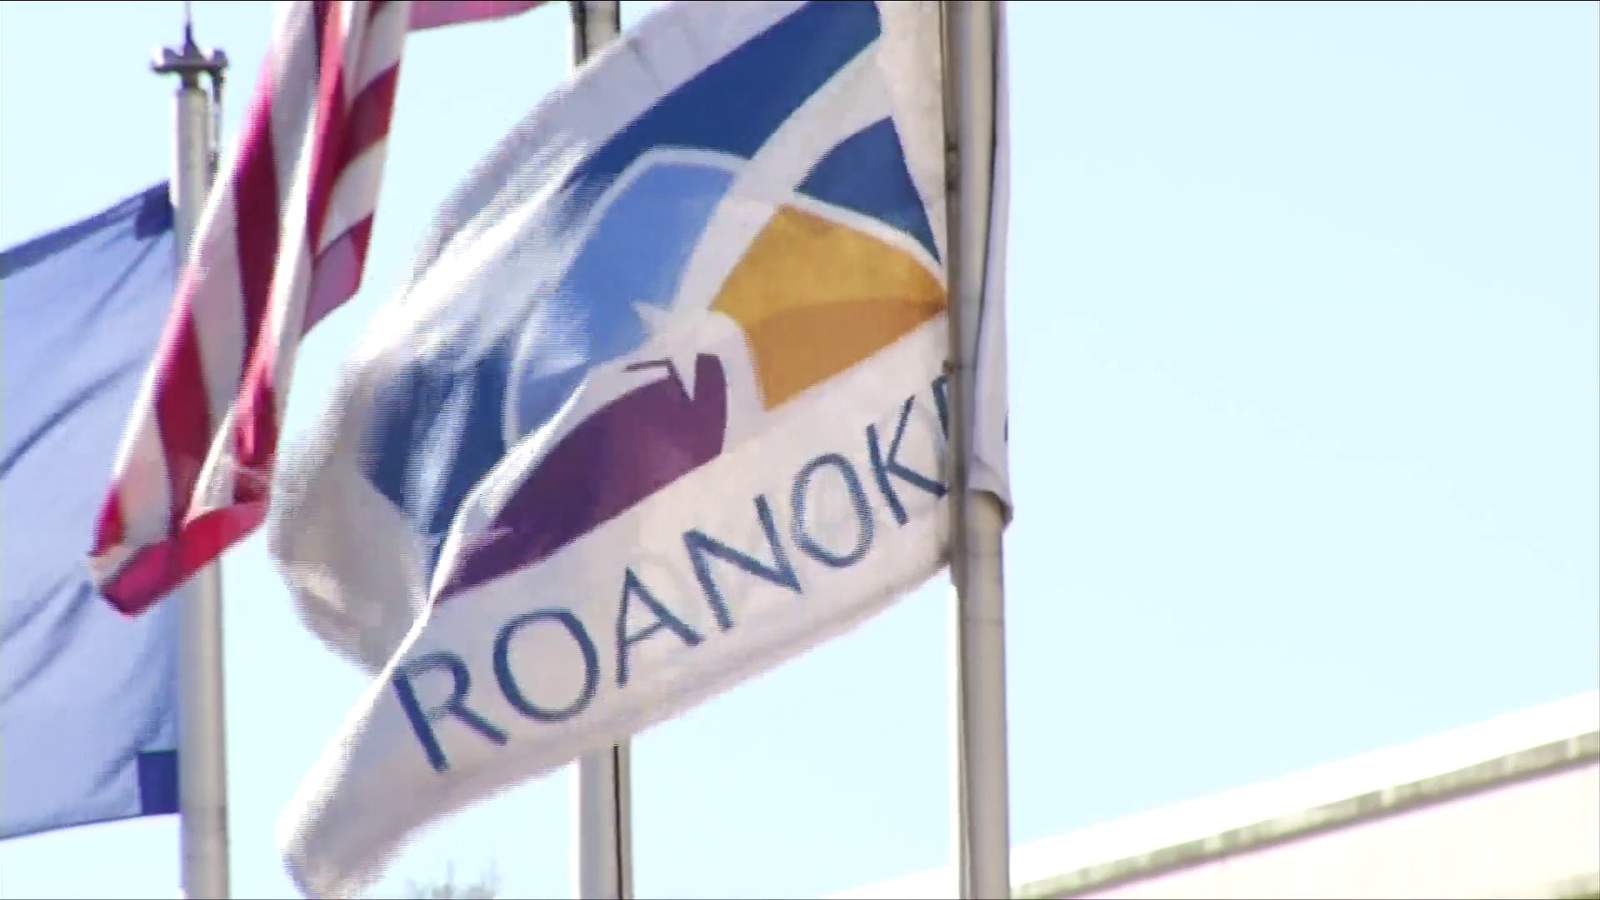 Roanoke City Council bans firearms on all city-owned property including Berglund Center